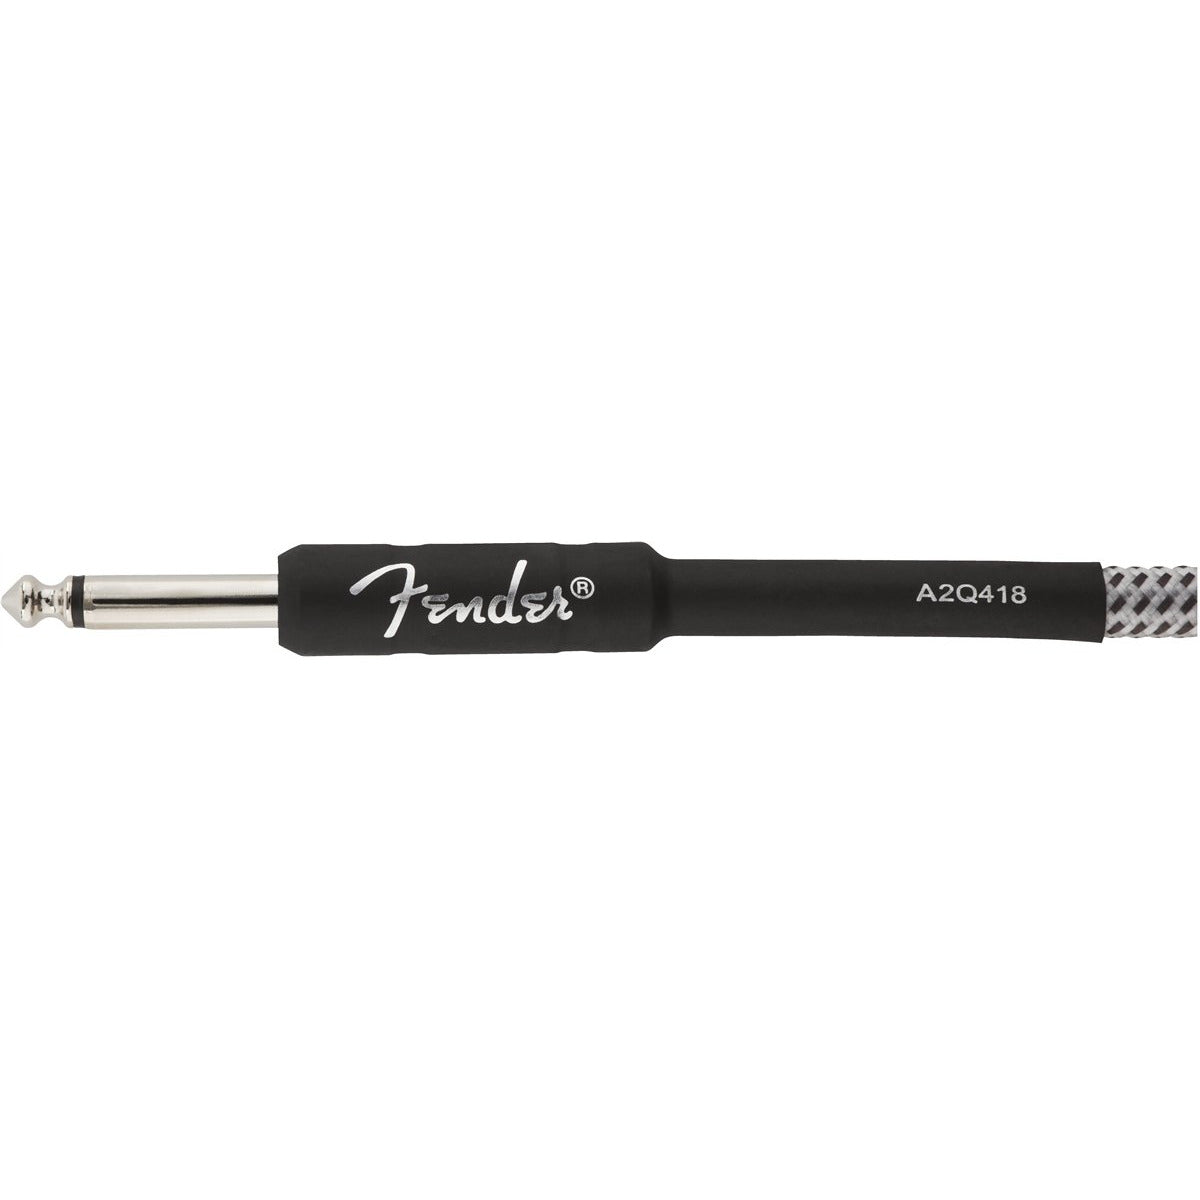 1/4 inch jack of Fender Professional Series Instrument Cable